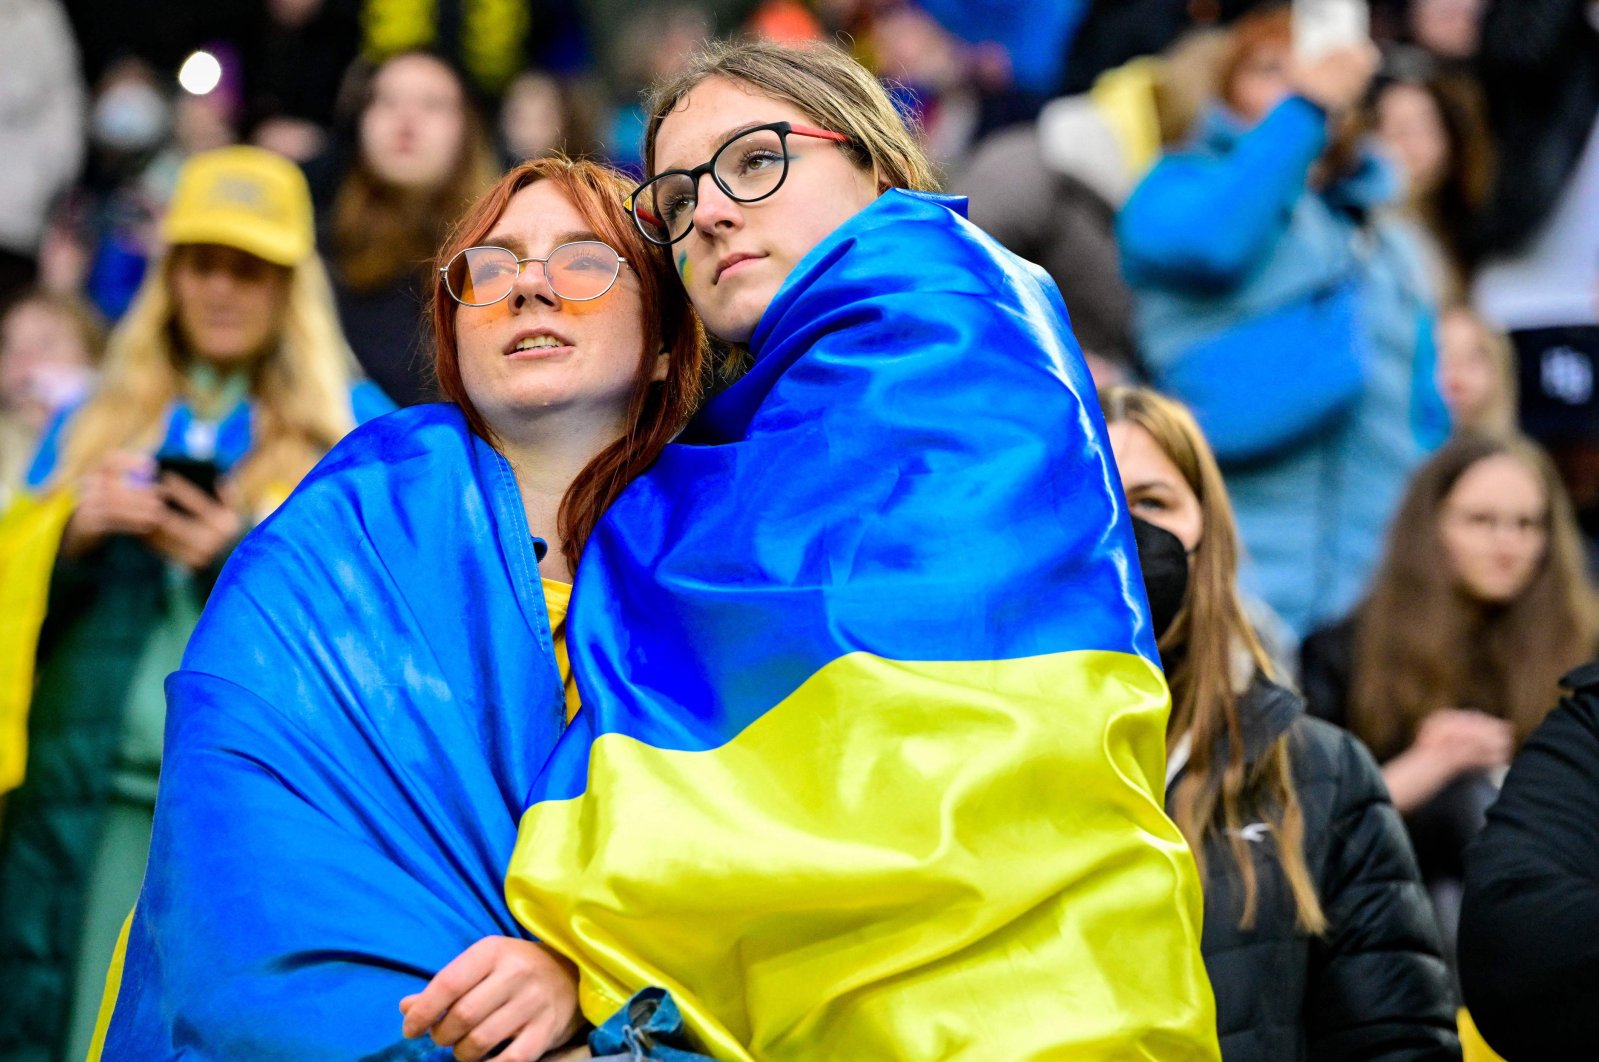 Fans draped in Ukraine flags attend a friendly football match between Borussia Dortmund and Dynamo Kyiv, Dortmund, Germany, April 26, 2022. (AFP Photo)